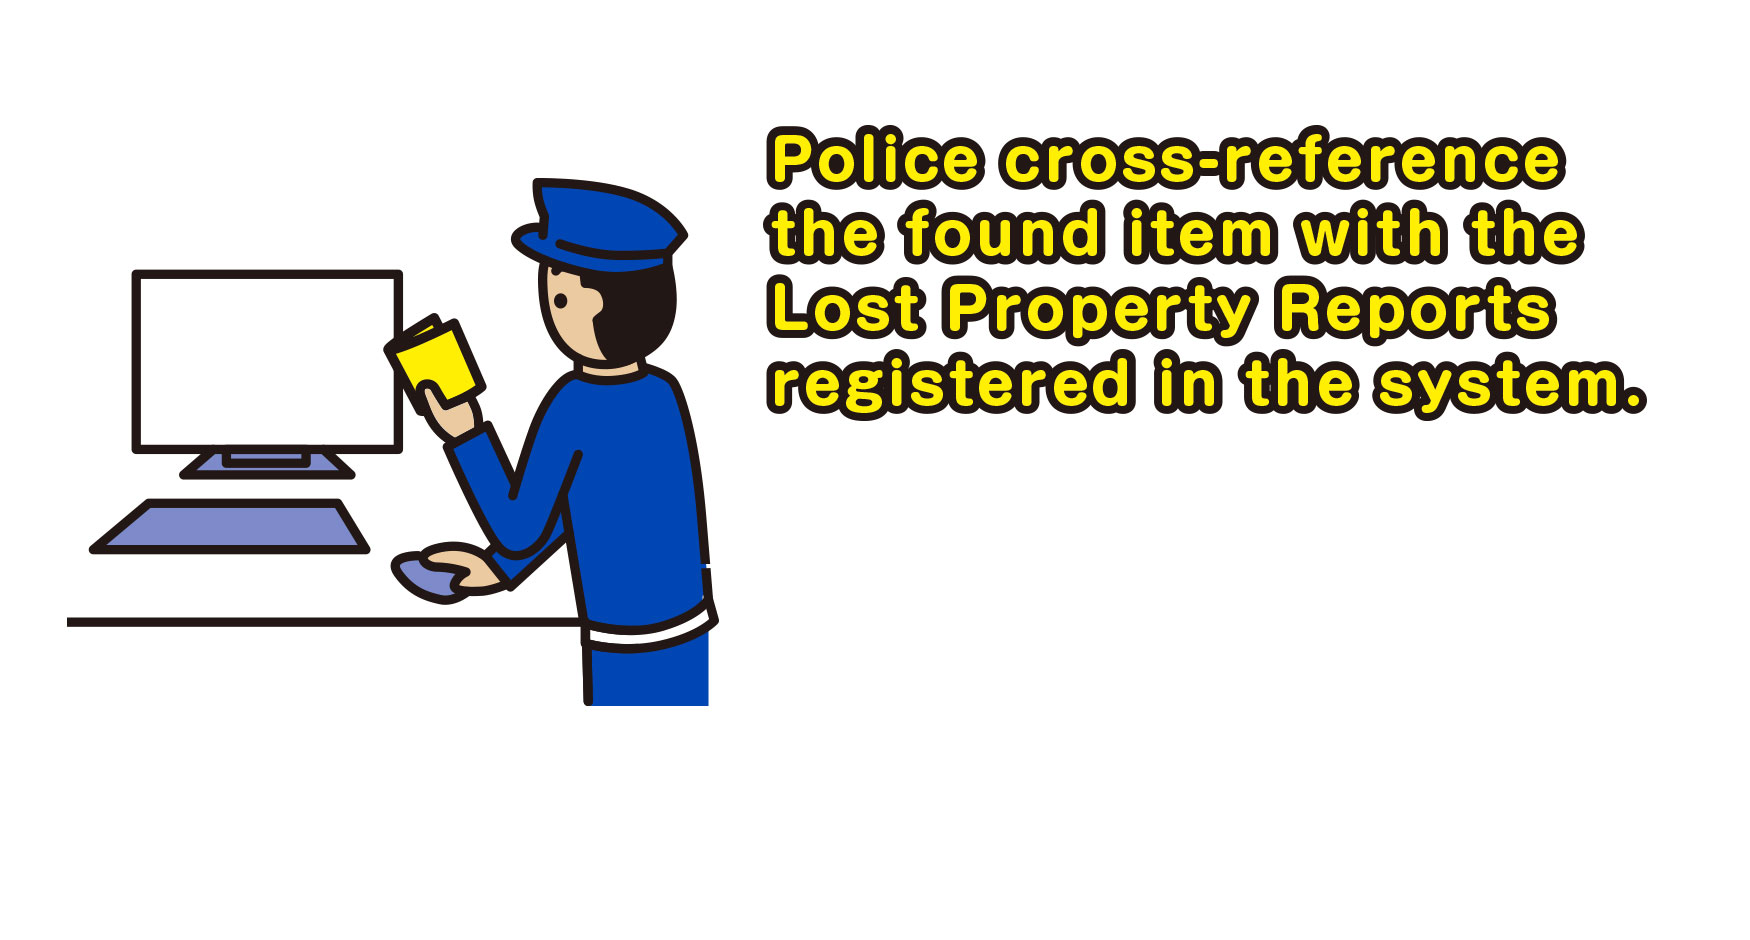 Police cross-reference the found item with the Lost Property Reports registered in the system.